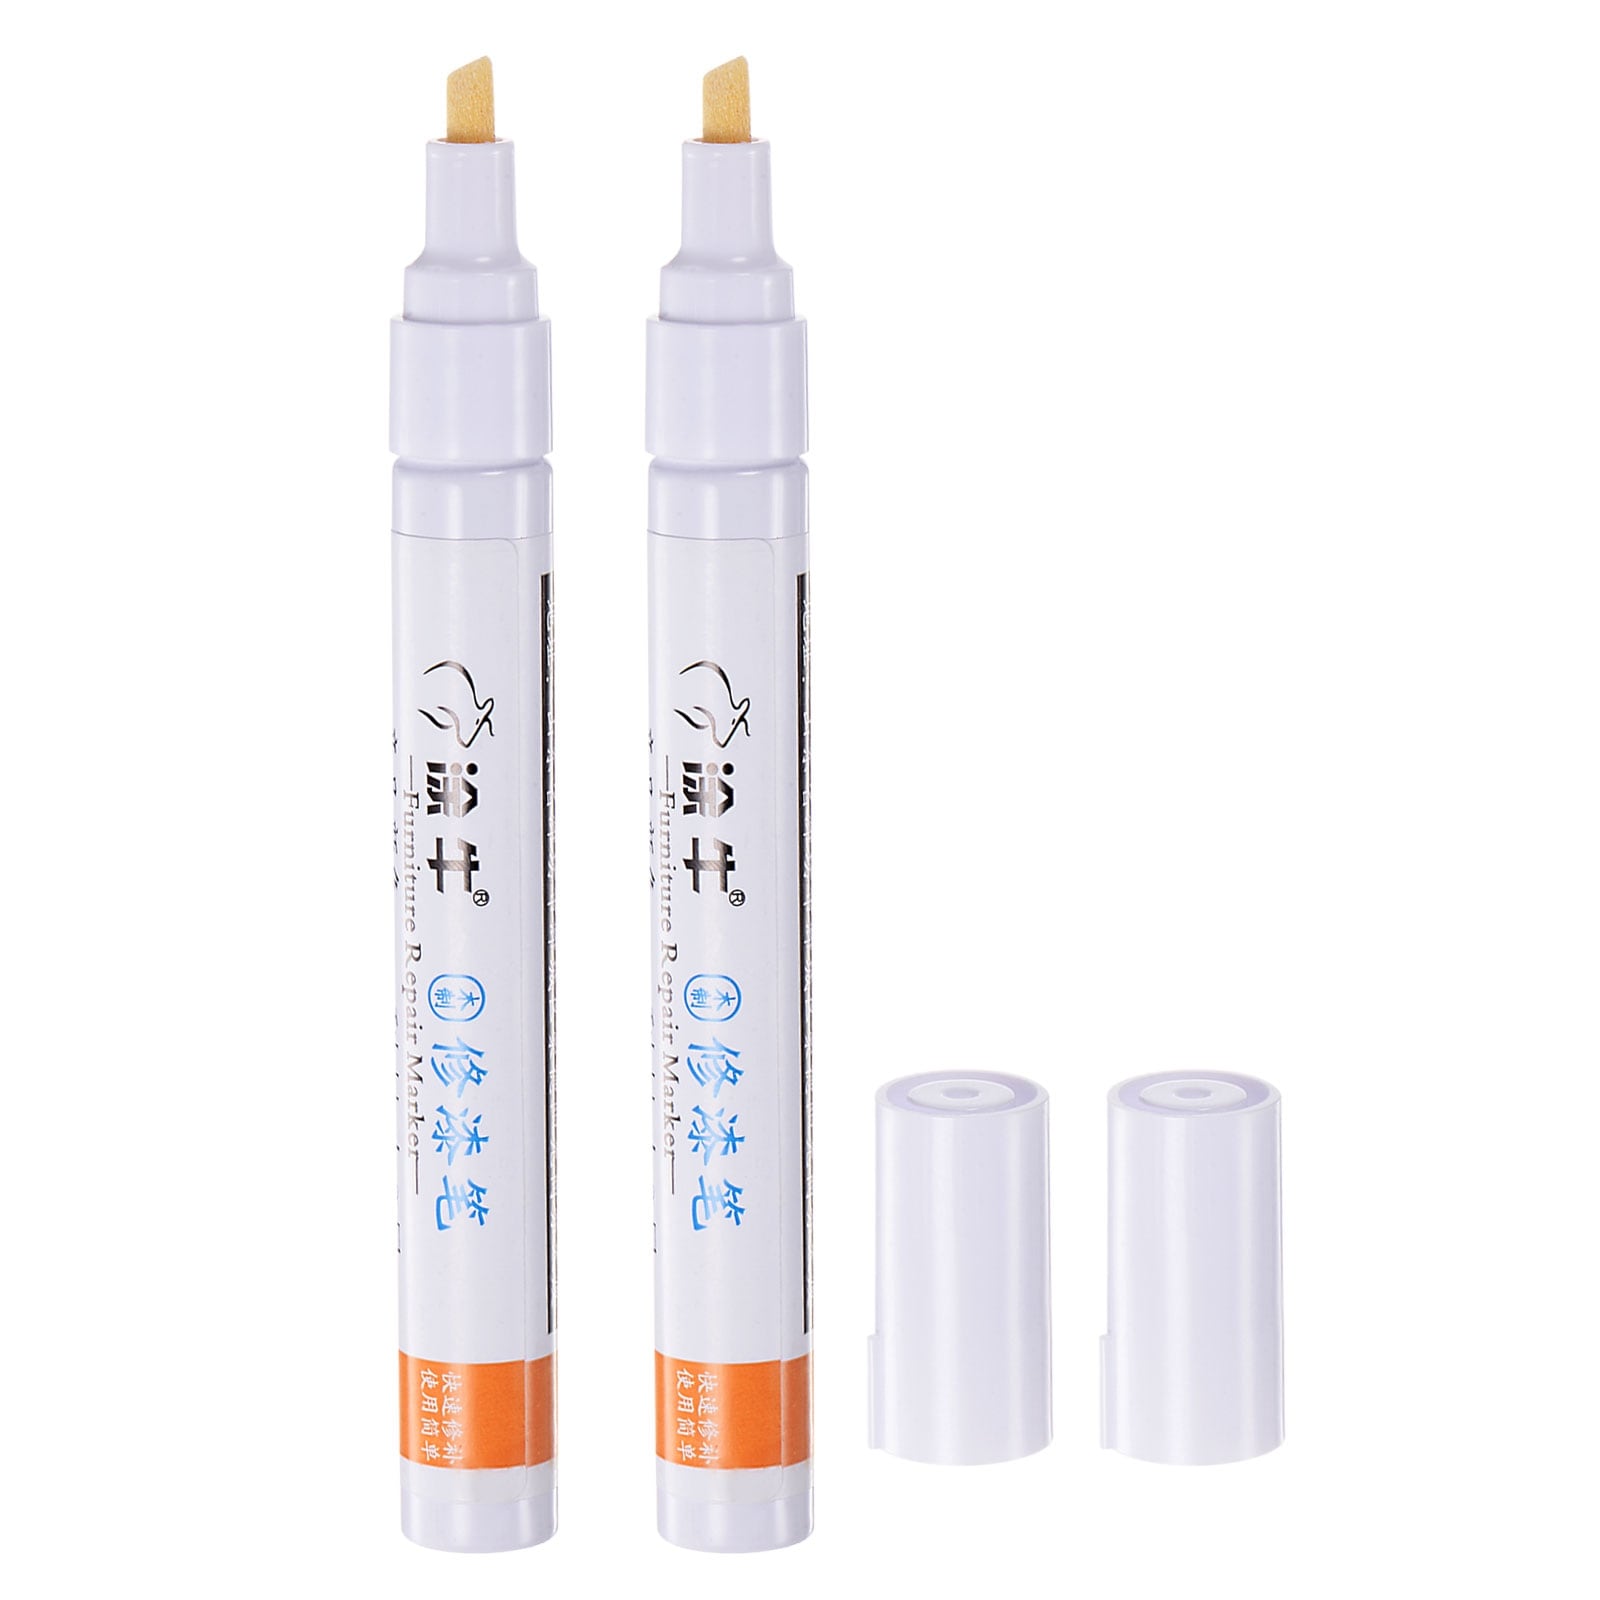 2pcs Furniture Markers Touch Up Wood Furniture Filler Pen, Pearl White - Pearl White